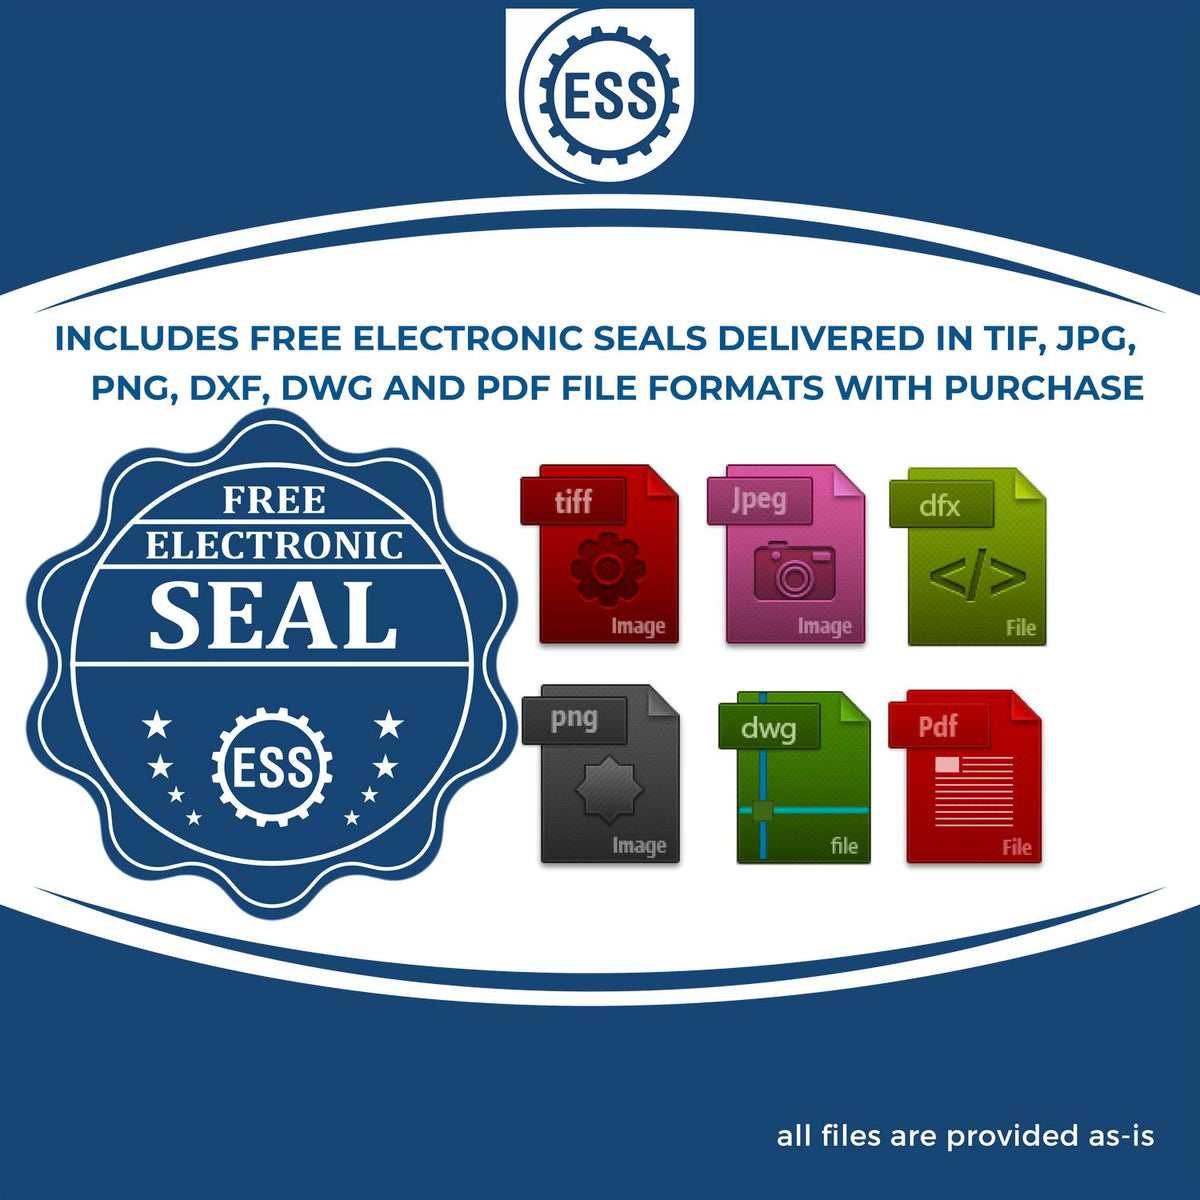 An infographic for the free electronic seal for the Self-Inking State Seal Kansas Notary Stamp illustrating the different file type icons such as DXF, DWG, TIF, JPG and PNG.